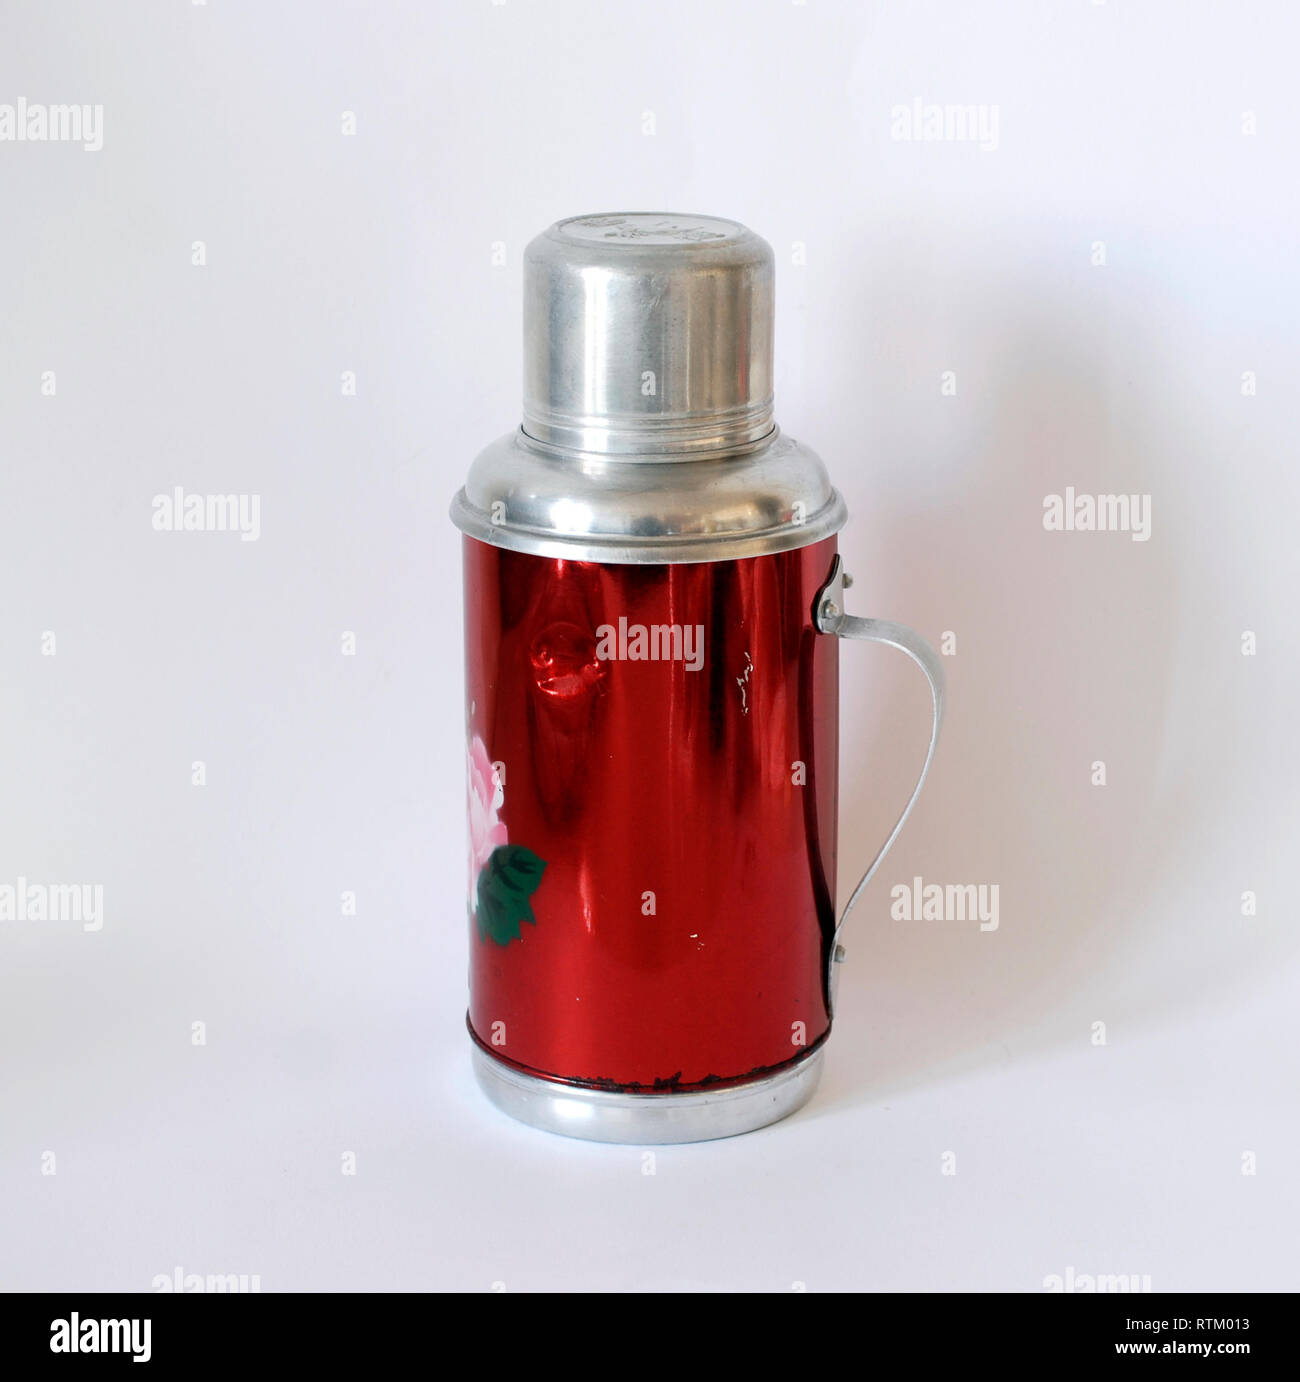 Anders dauw lijden vintage chinese aluminum thermos with flowers Stock Photo - Alamy